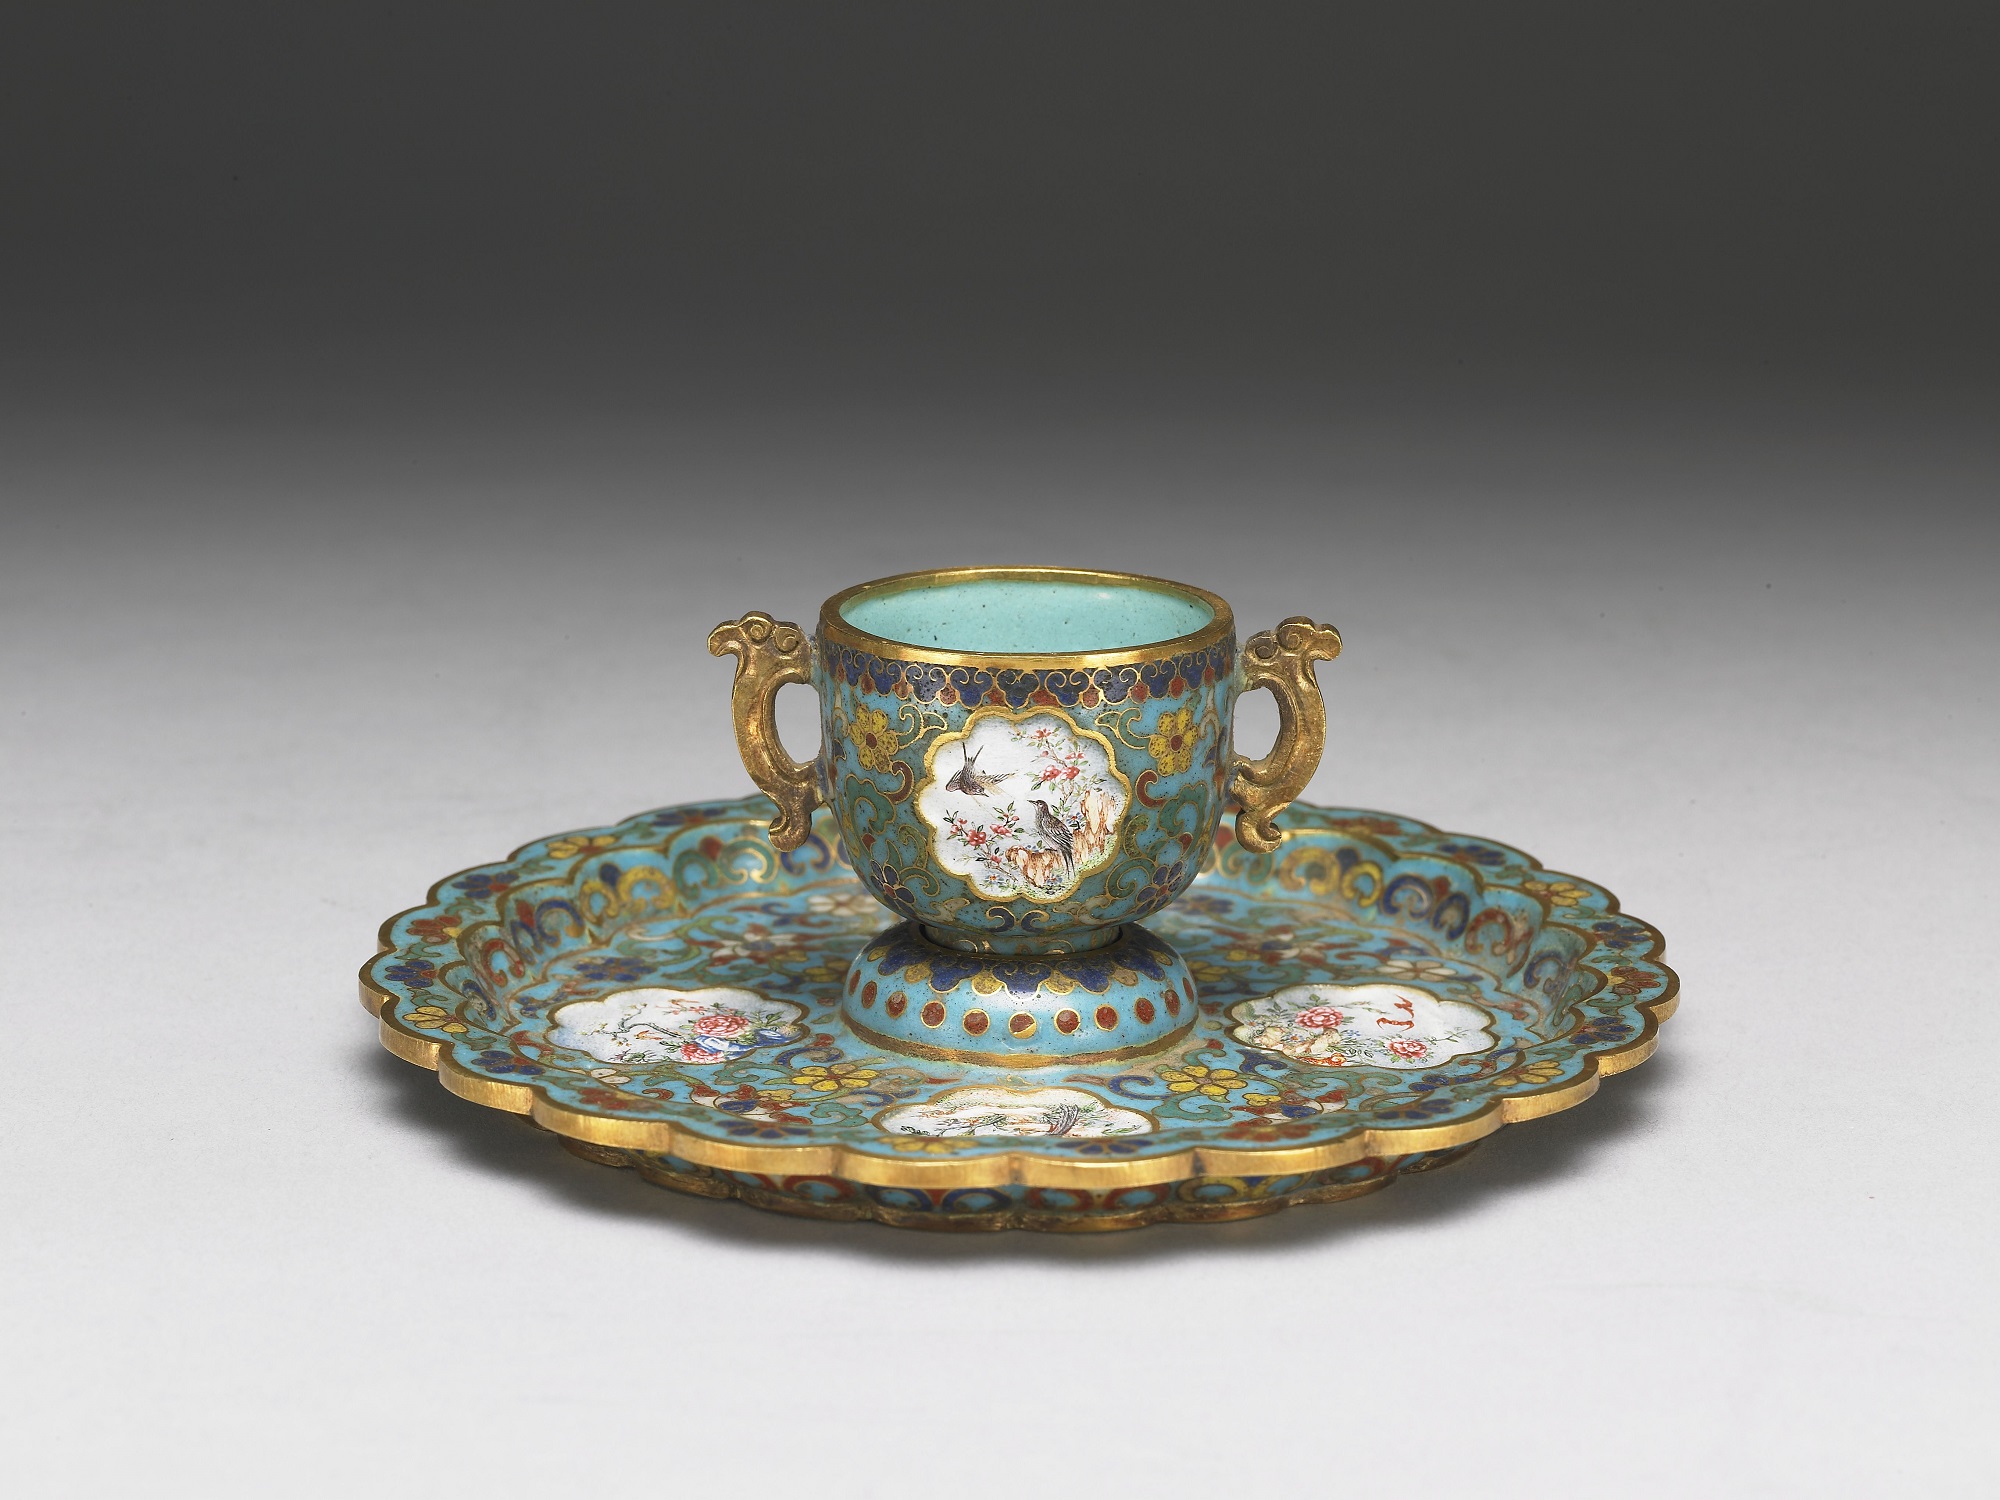 Gold cloisonné cup and saucer with painted enamel designs of flowers and birds